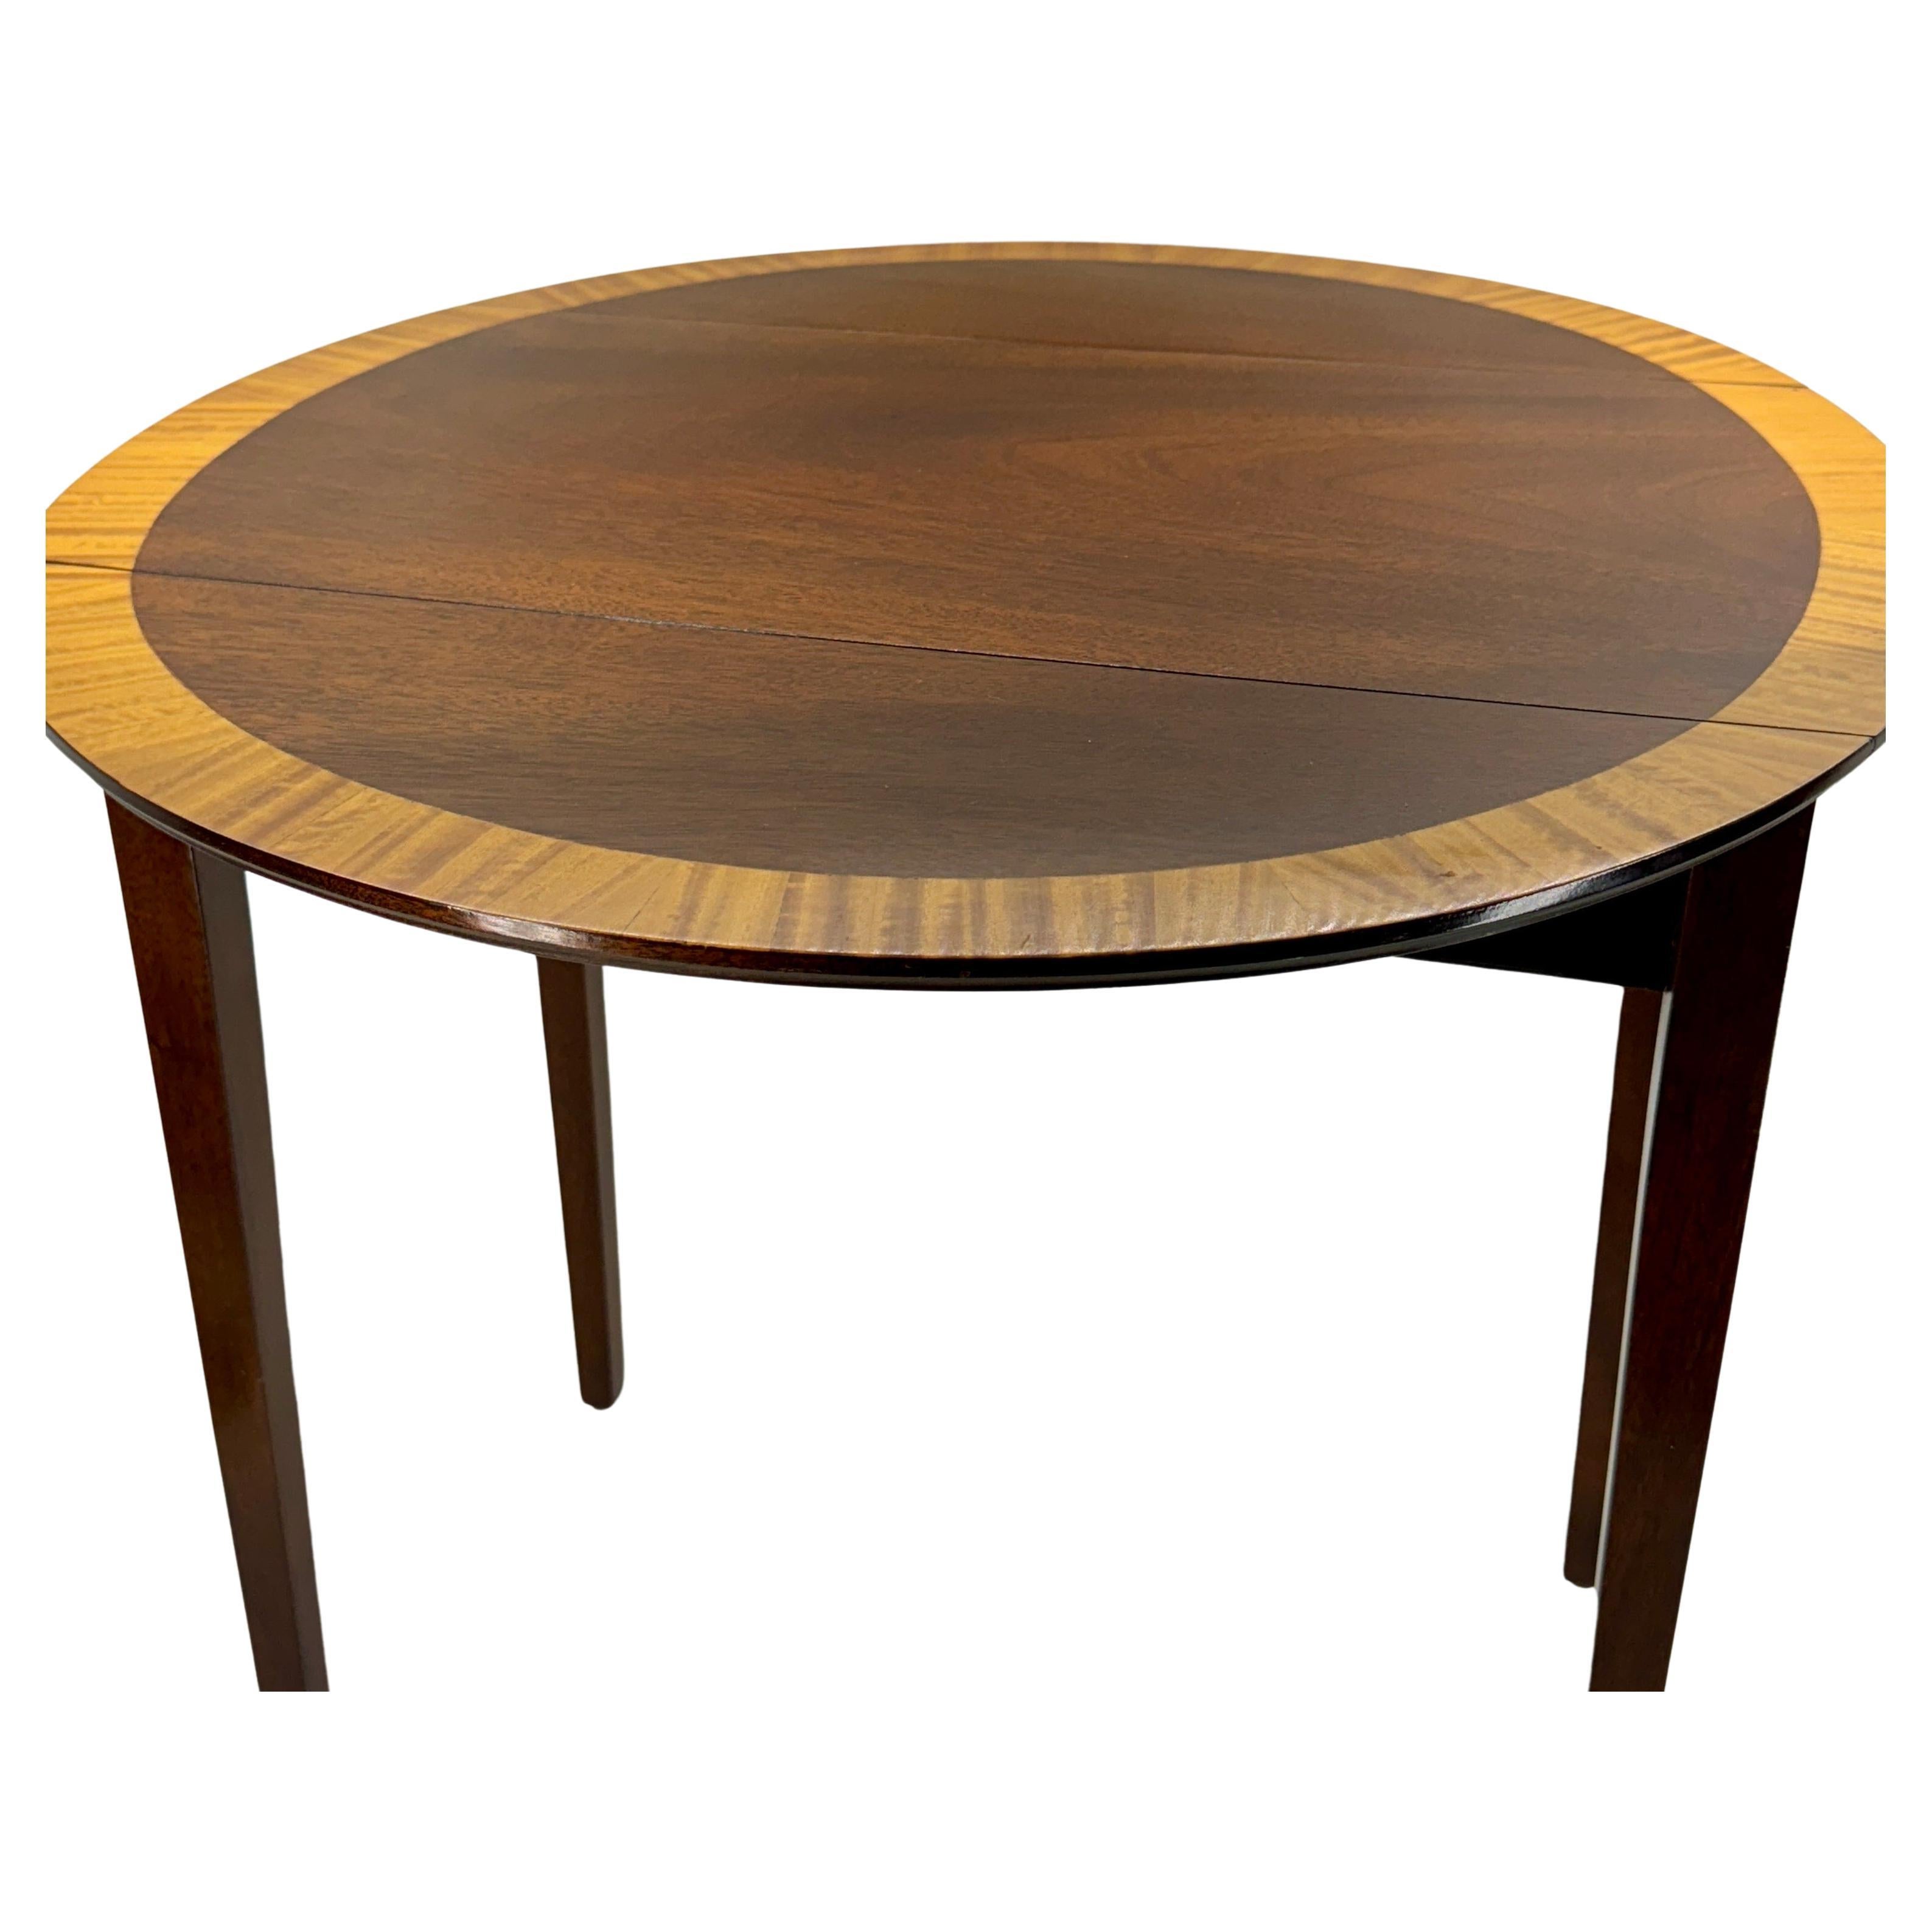 Classic small scale Pembroke mahogany table with a satinwood banded top and one drawer. This piece is raised on tall square tapering legs and the sides are flanked with two oval satinwood fans. This side or lamp table is finished off with a brass